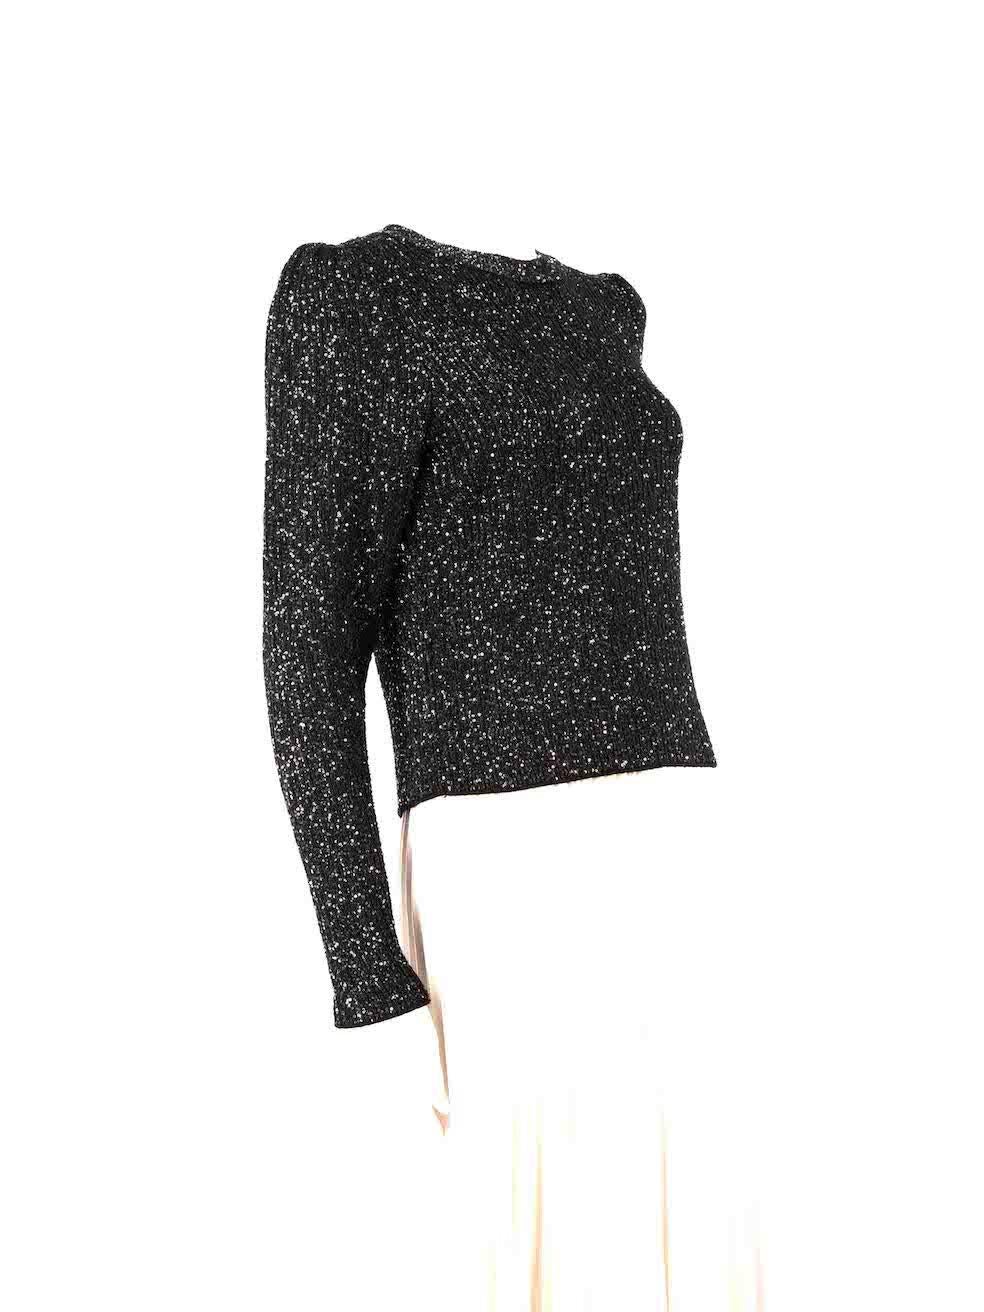 CONDITION is Never worn, with tags. No visible wear to jumper is evident on this new ba&sh designer resale item.
 
 
 
 Details
 
 
 Black
 
 Viscose
 
 Knit jumper
 
 Sequinned
 
 Round neck
 
 Long sleeves
 
 
 
 
 
 Made in Italy
 
 
 
